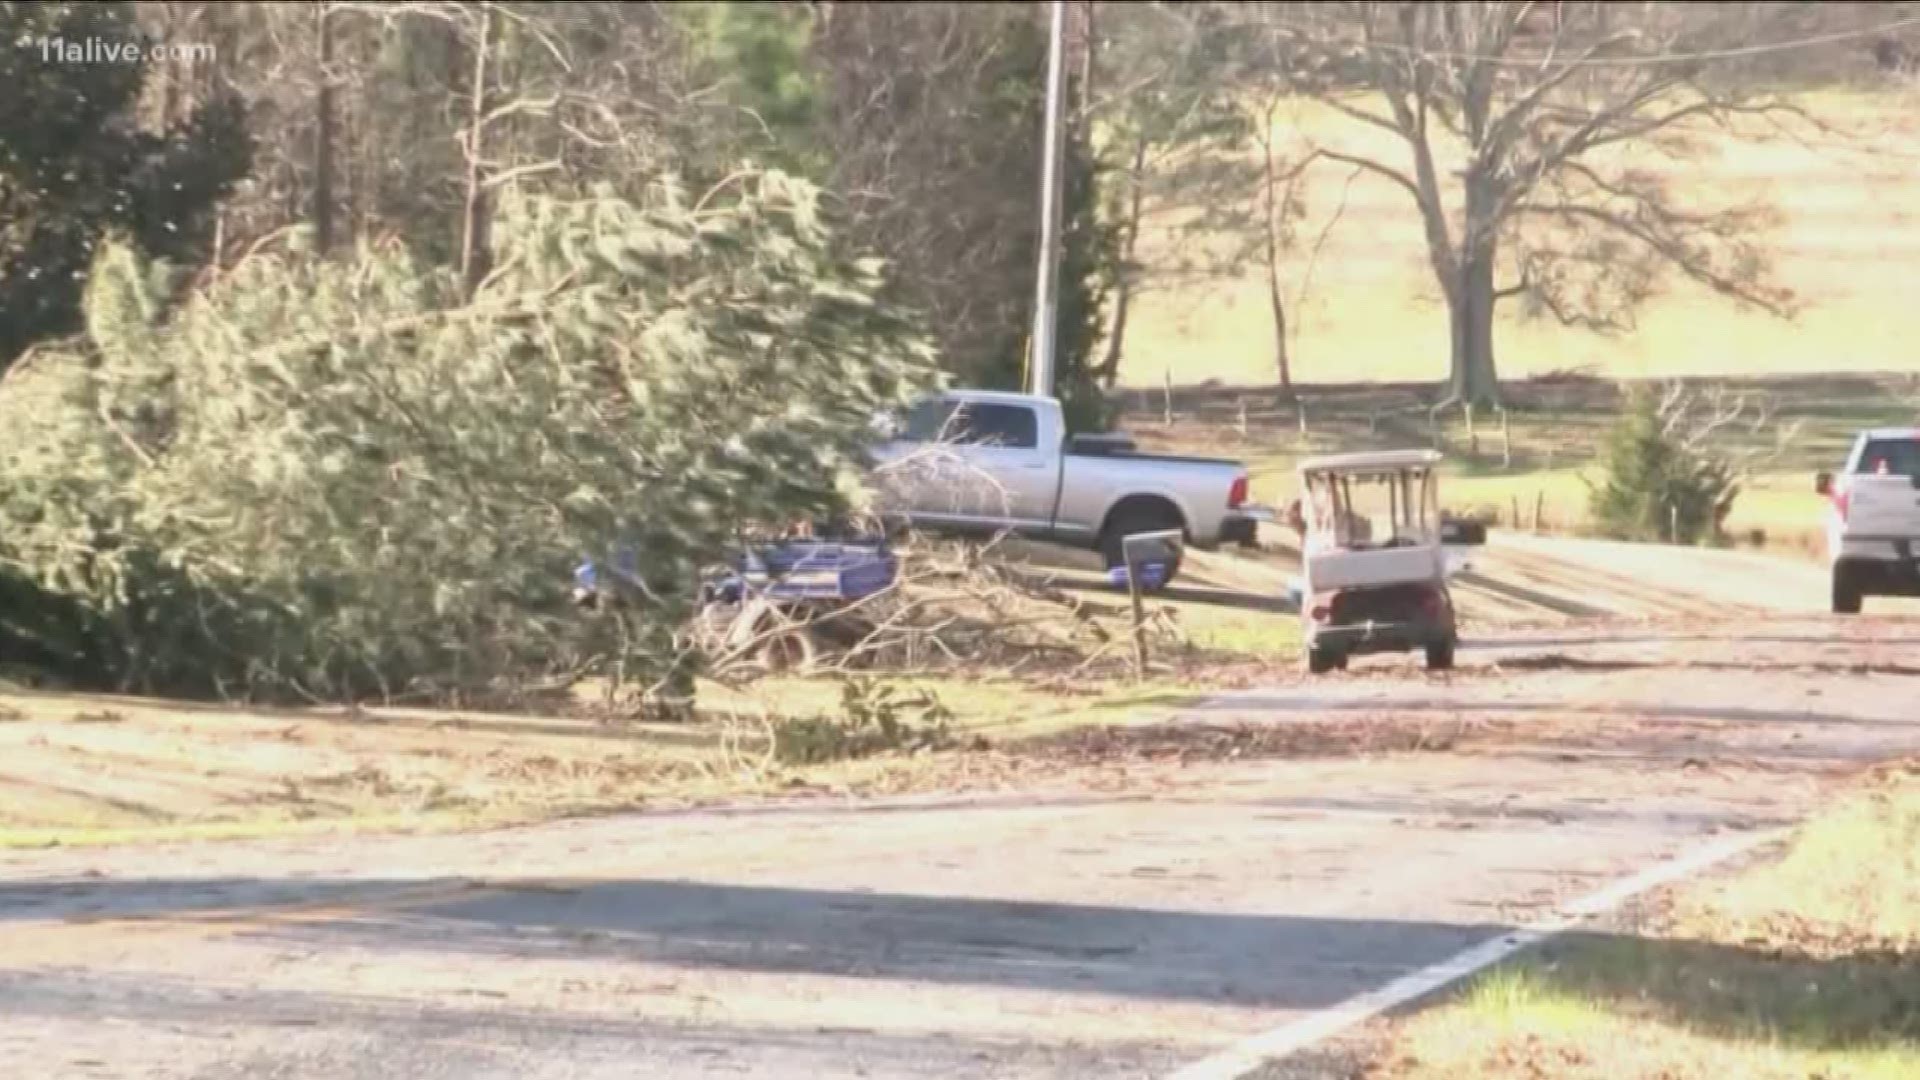 Storms ripped through Coweta County early Sunday morning, knocking down trees and damaging structures.